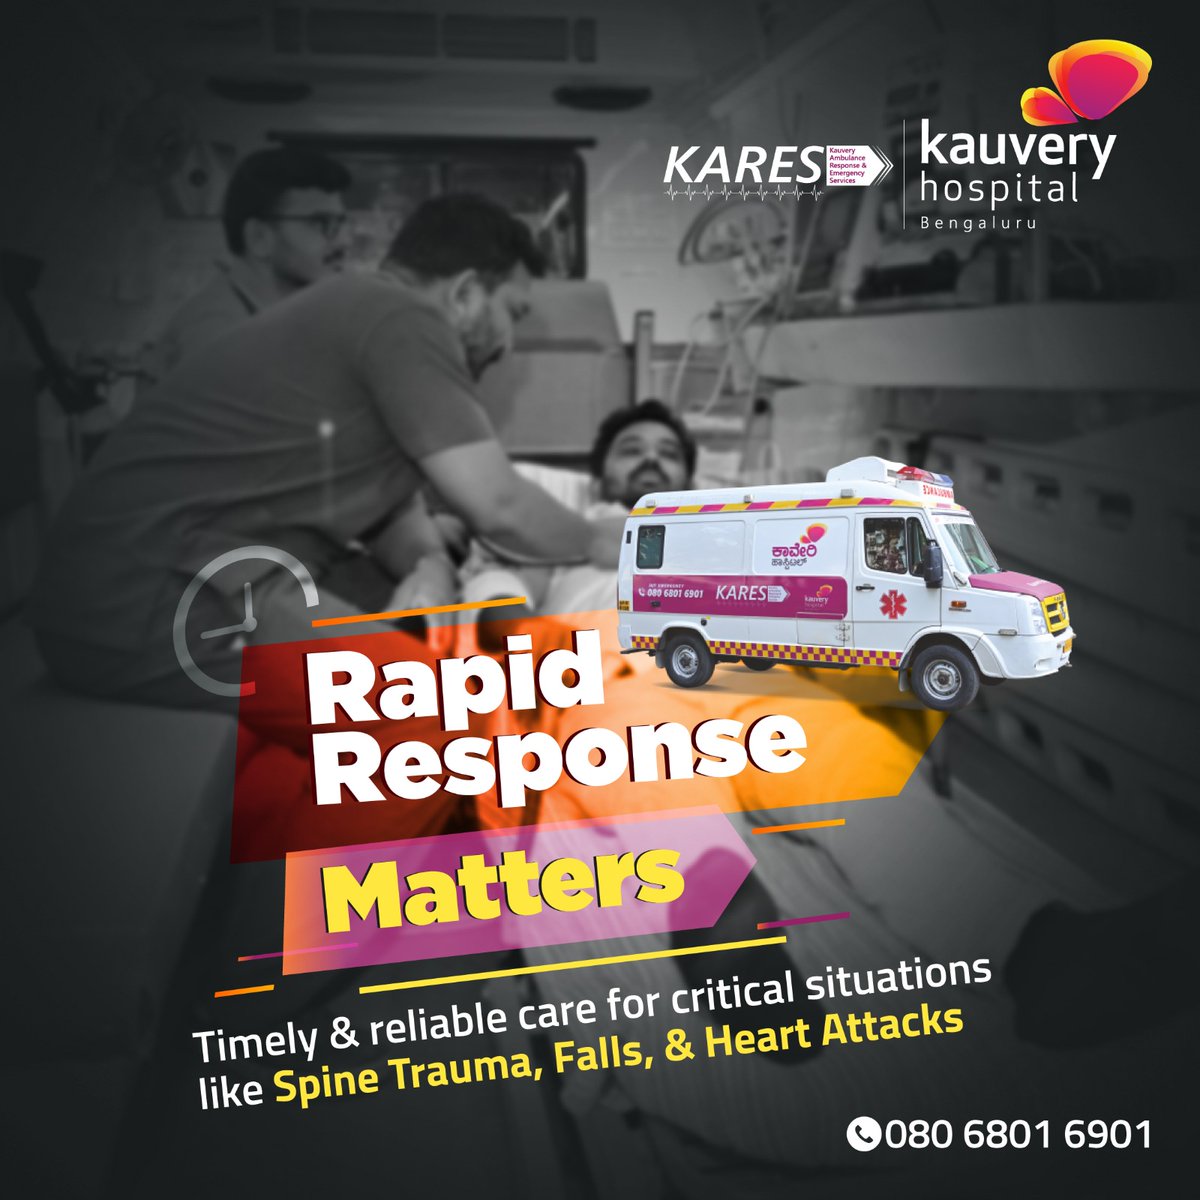 Rest assured, you're covered for peace of mind. Kauvery Hospital's Rapid Response is committed to providing timely and reliable care for critical situations.​

Call on 080 6801 6901​

#multispecialityhospital #kauveryhospitals #heartattacks #spinetrauma